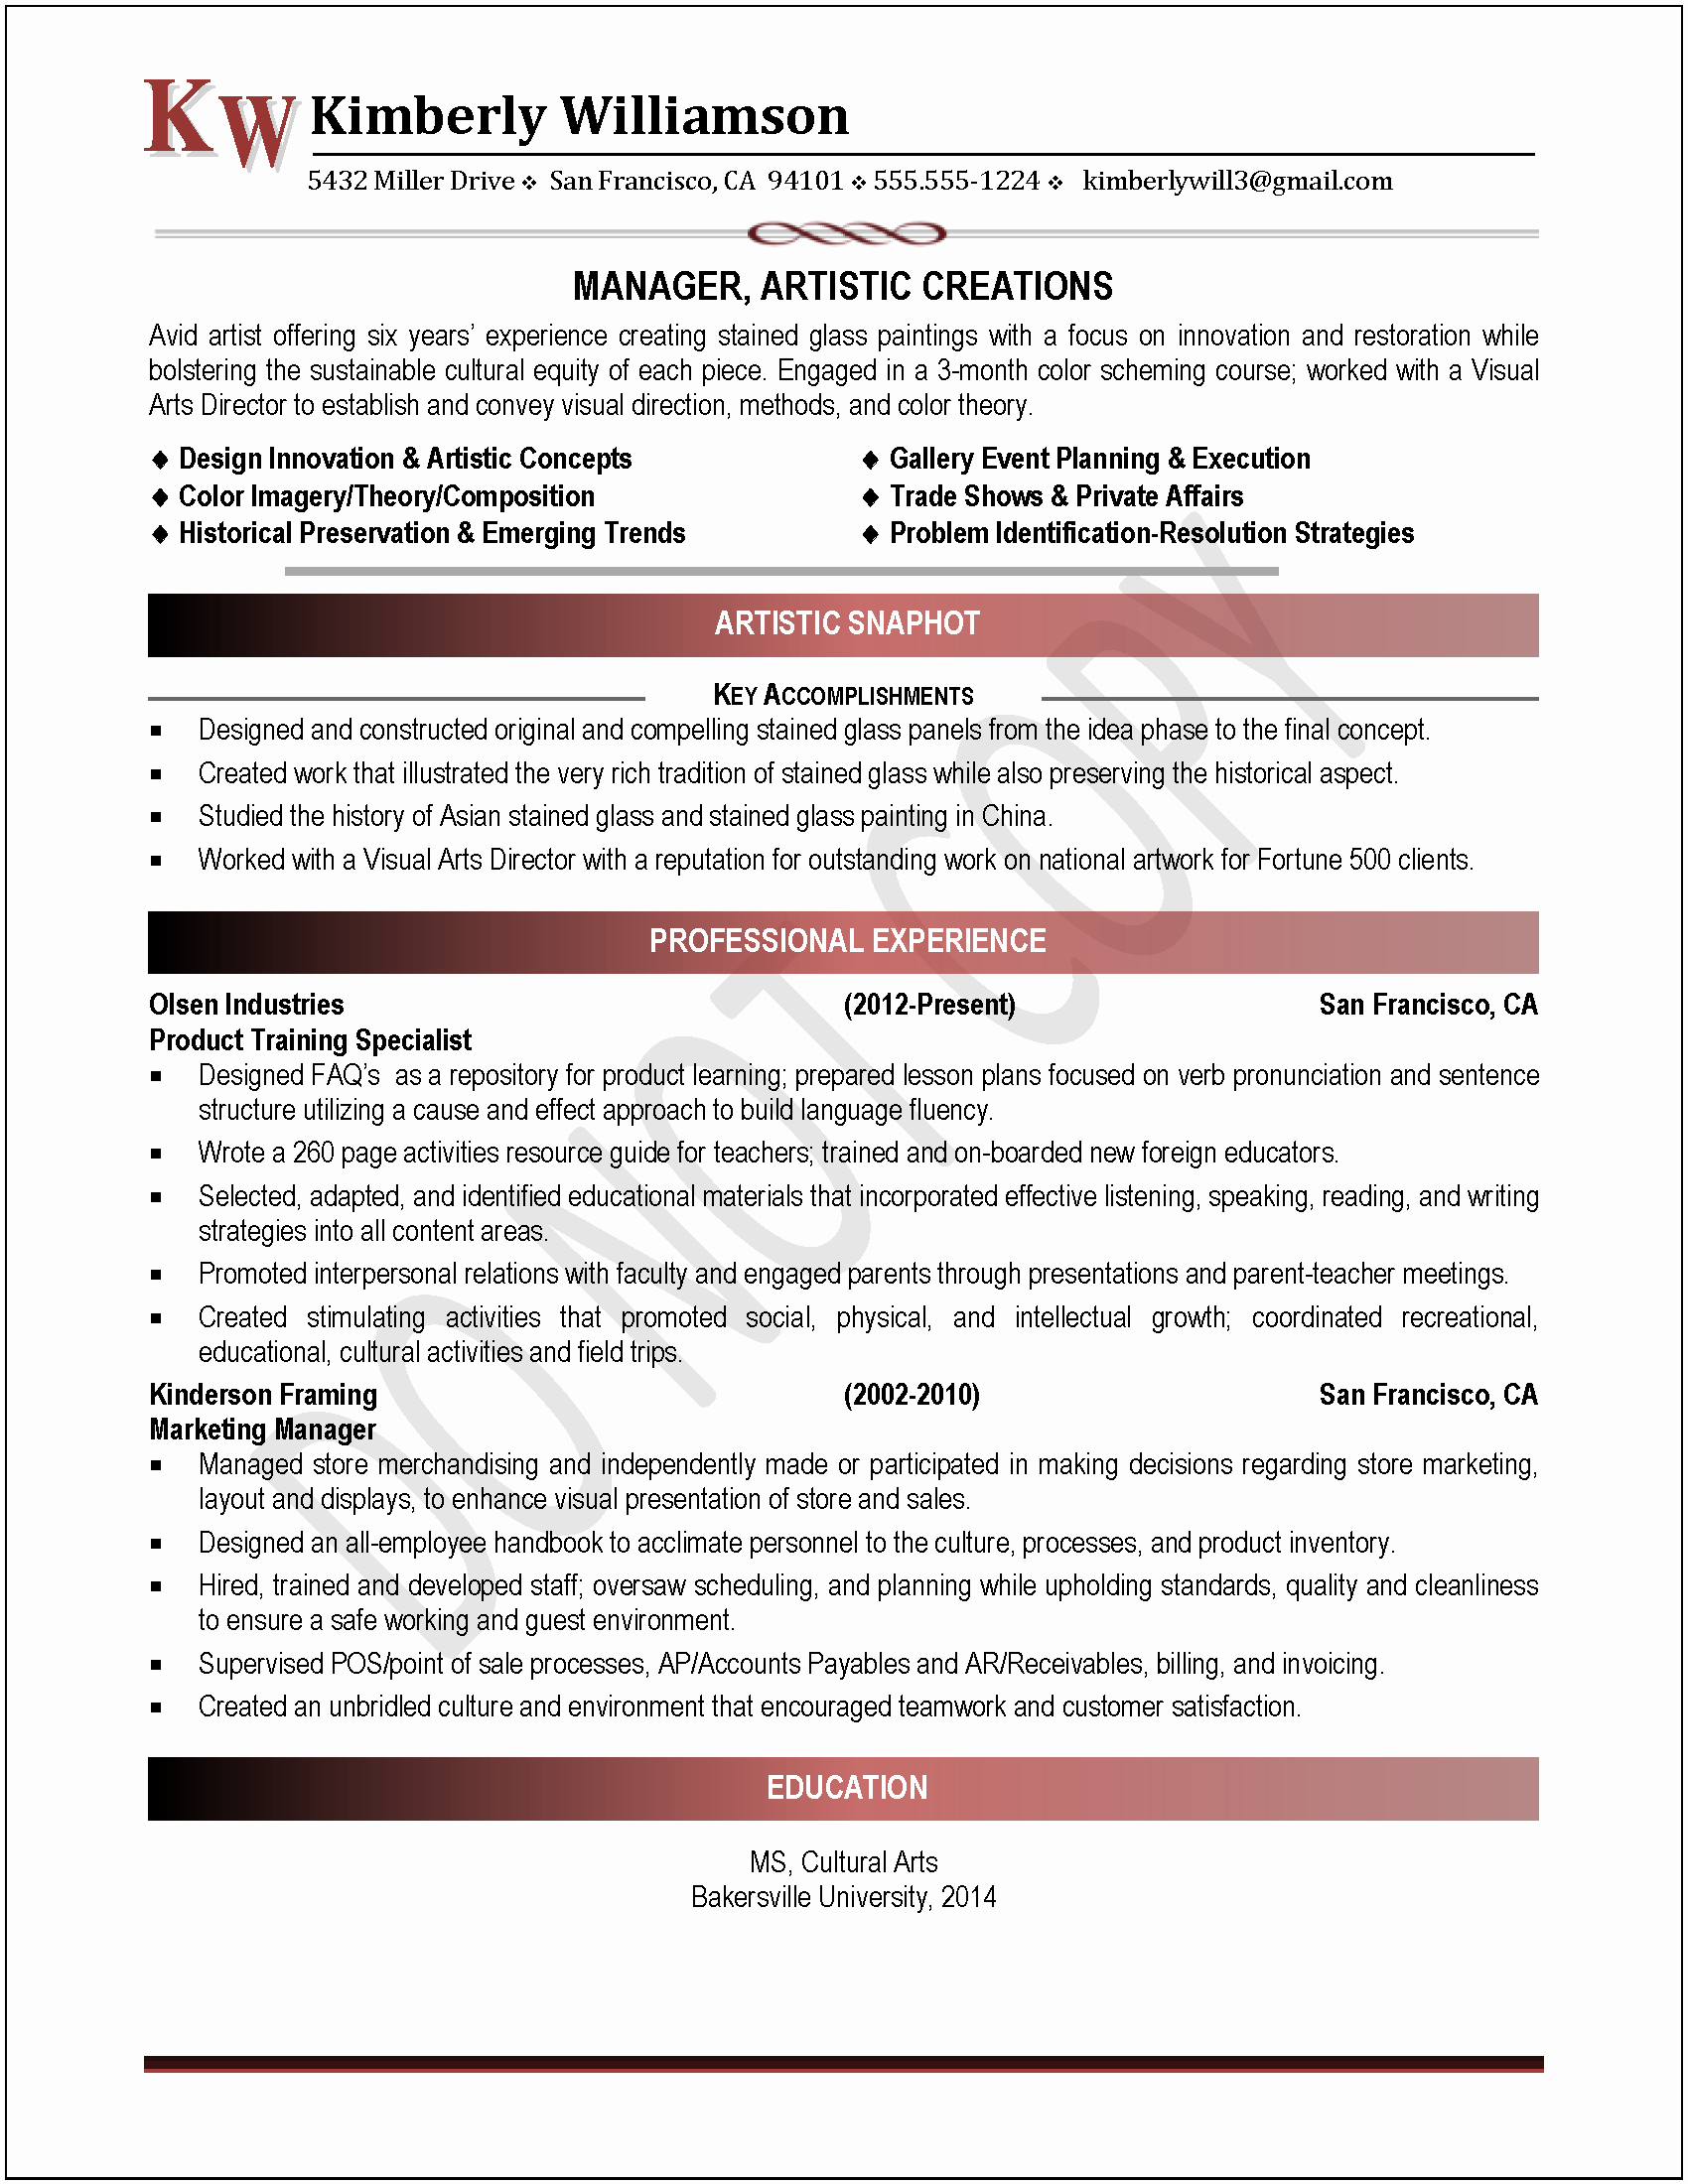 Exles Of Professional Resumes Search Results for